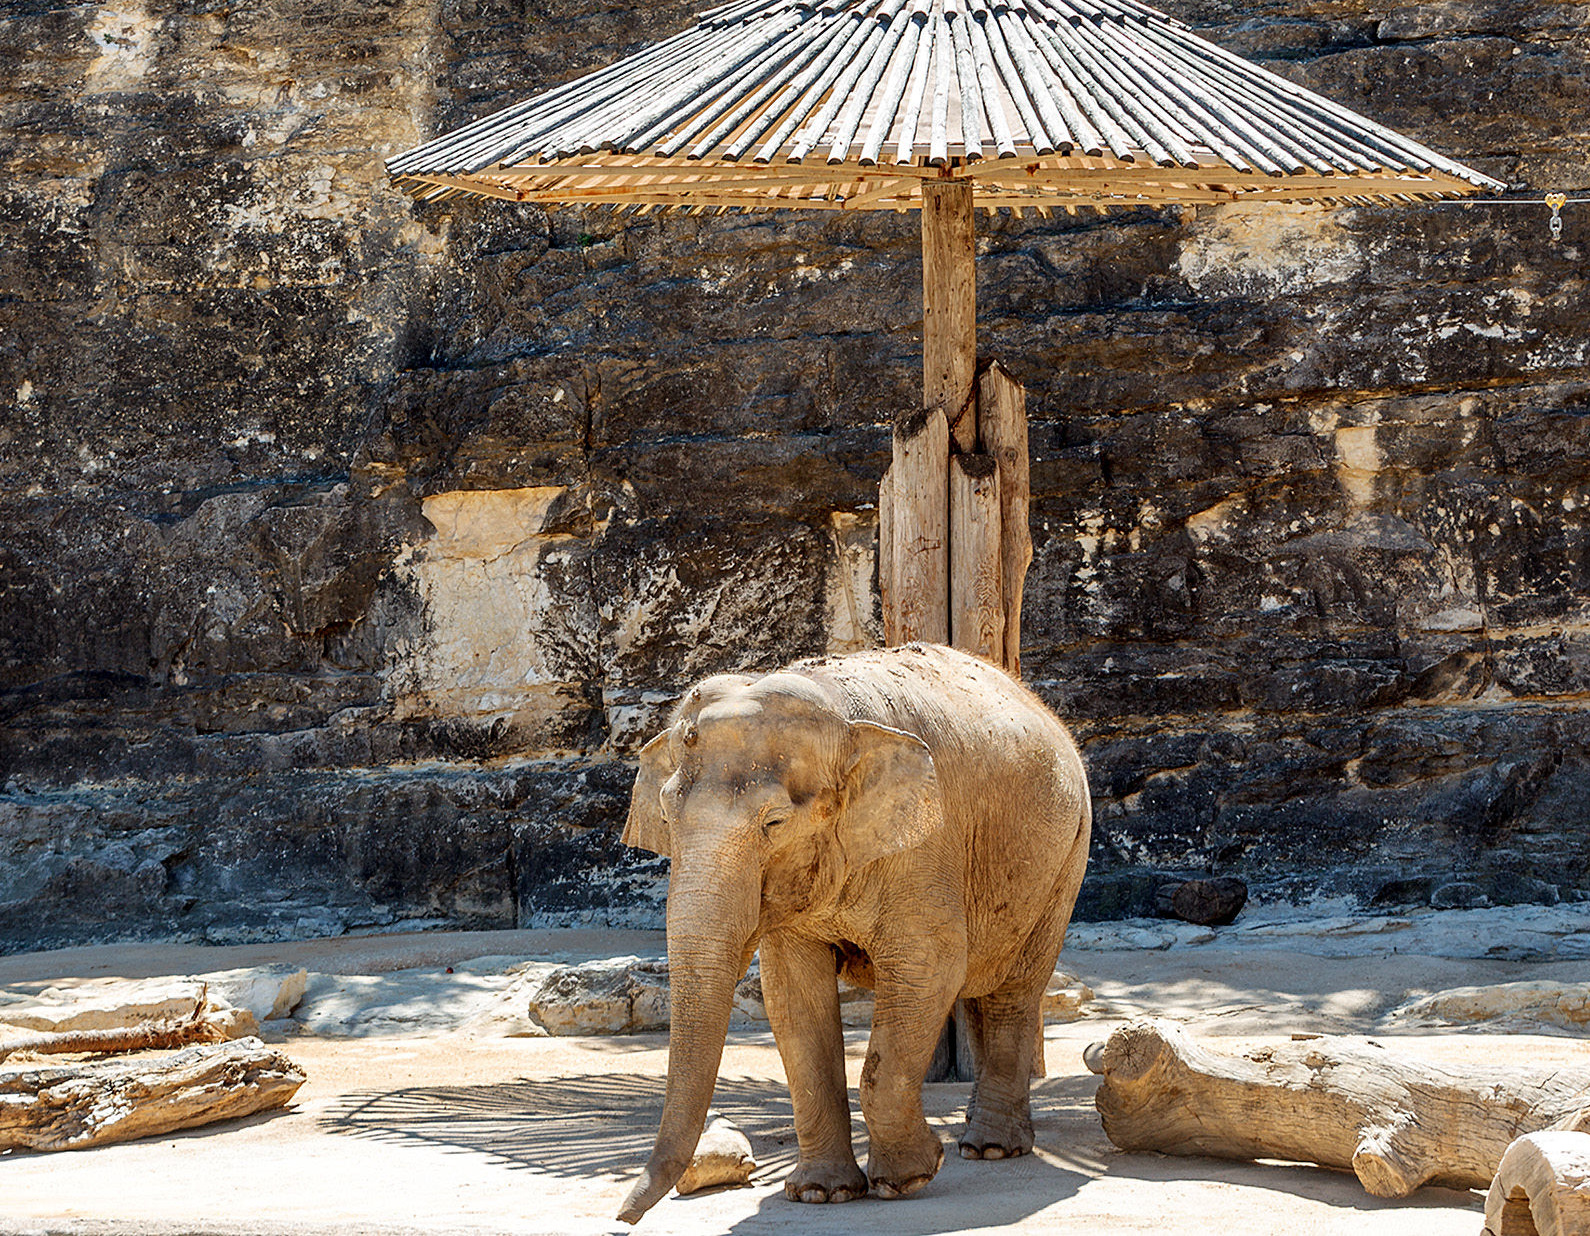 San Antonio Zoo's only elephant will remain, despite relocation rule